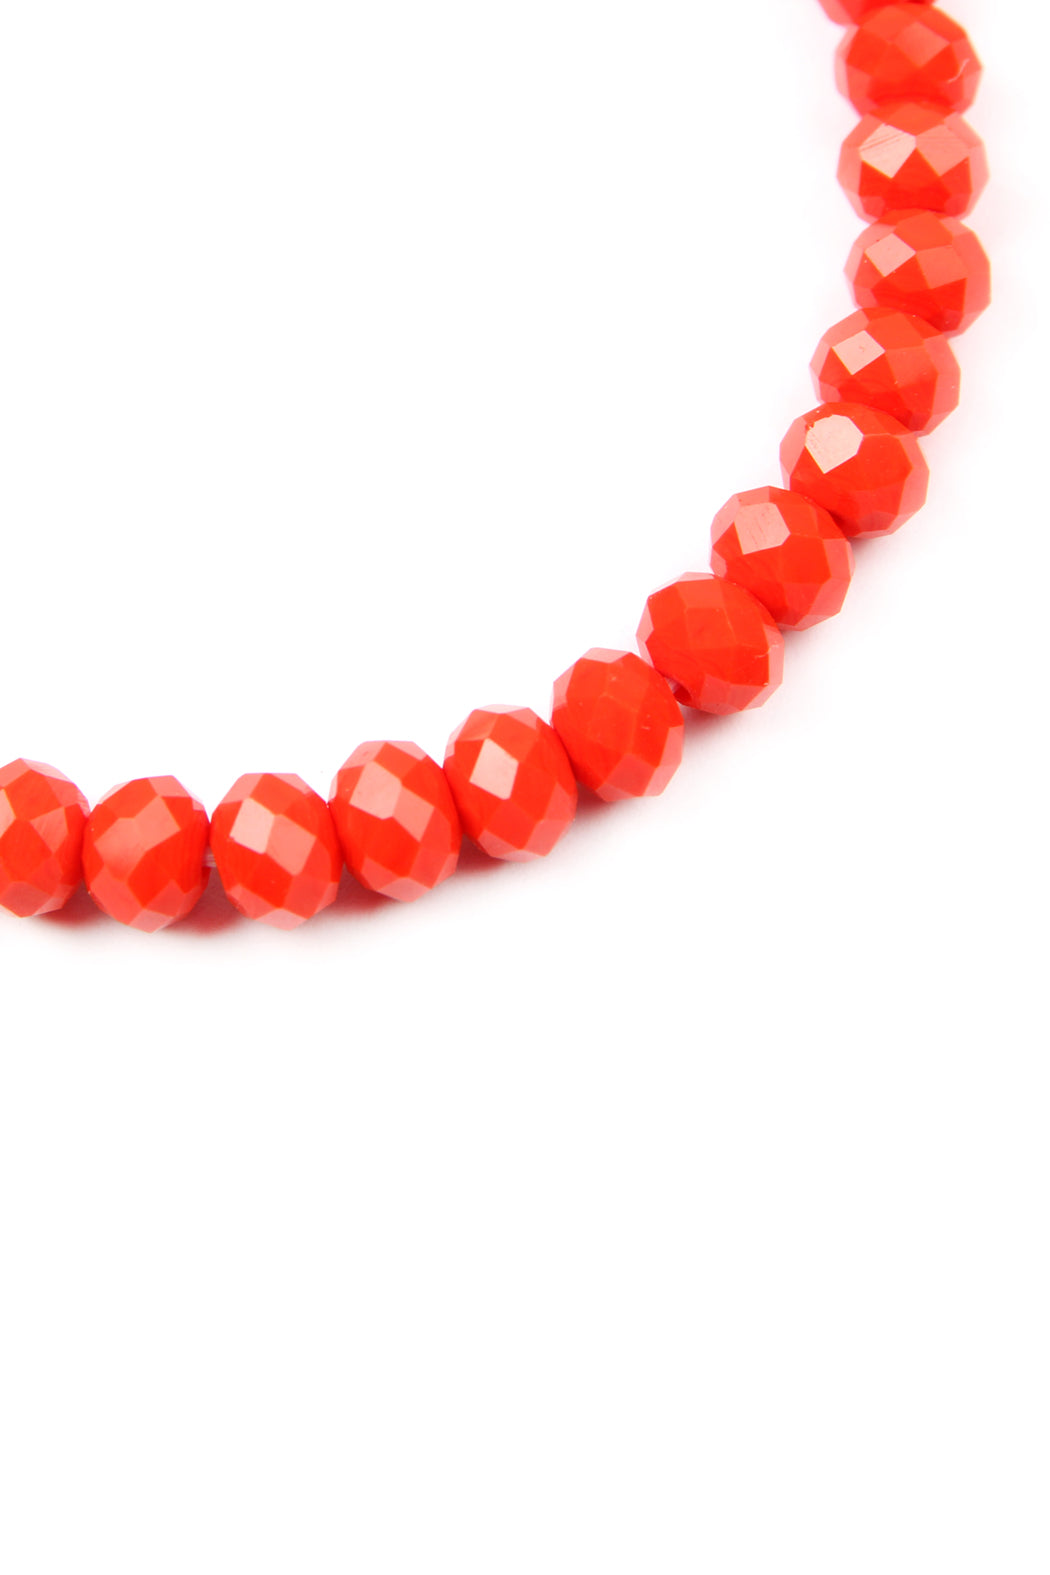 LOVE AND BE LOVED 6MM GLASS BEADS STRETCH BRACELET